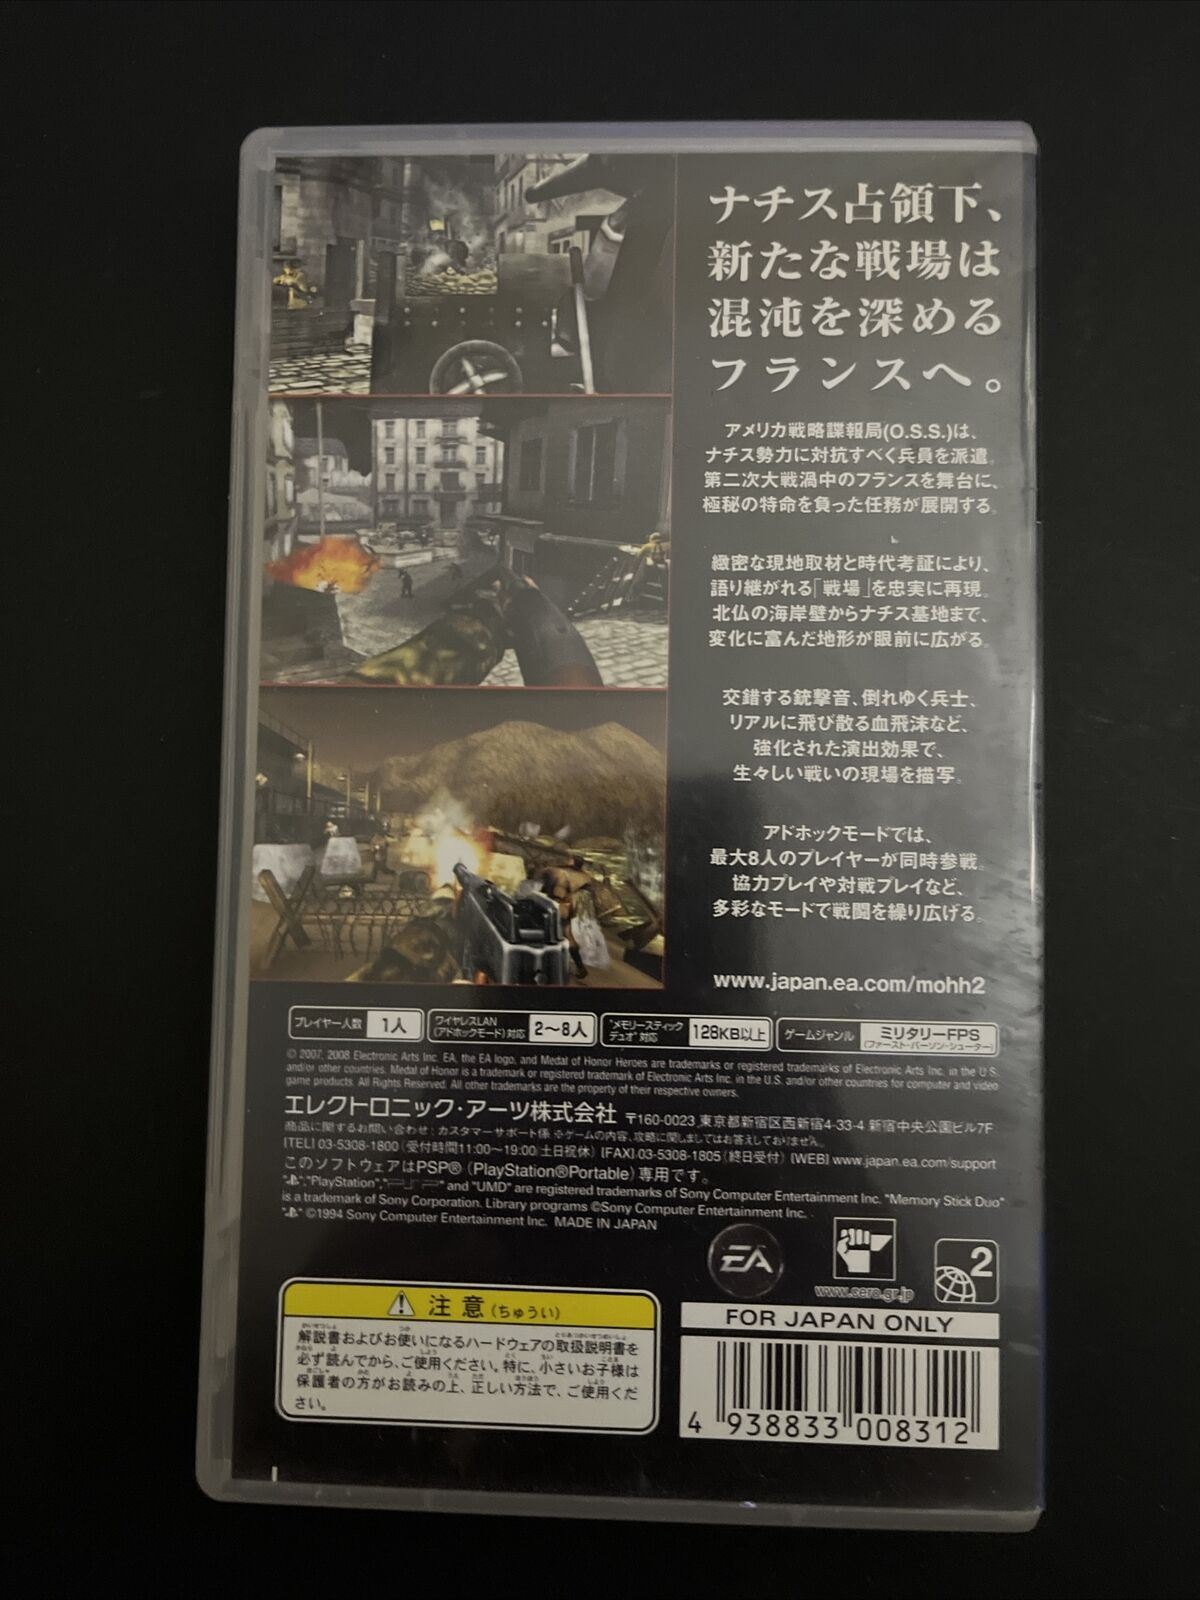 Medal of Honor: Heroes 2 - Sony PSP JAPAN Game with Manual